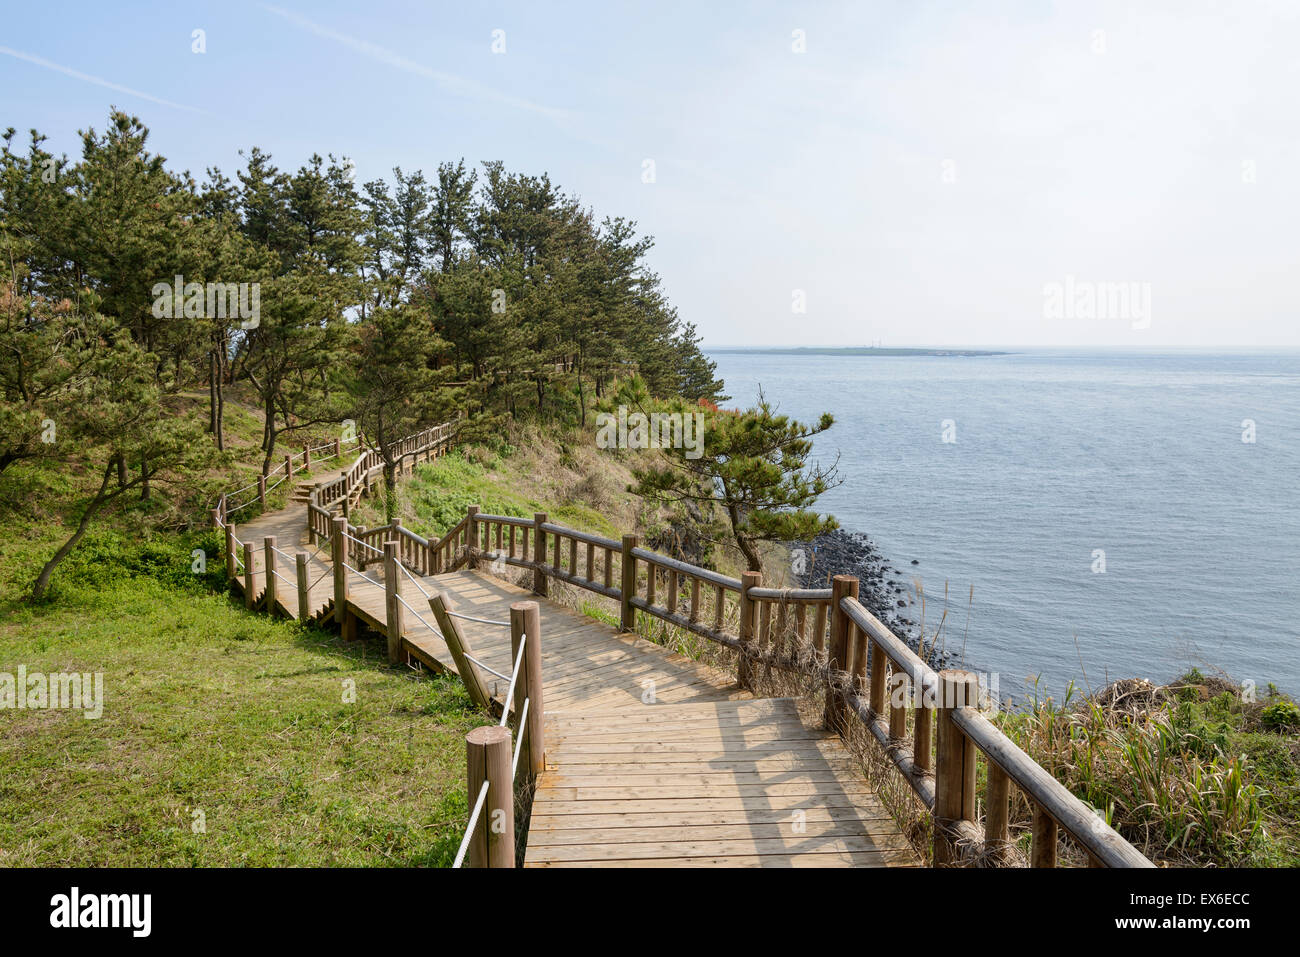 View of Olle walking path No. 10 Course in Songaksan in jeju island, Korea. Olle is famous trekking courses created along coast. Stock Photo